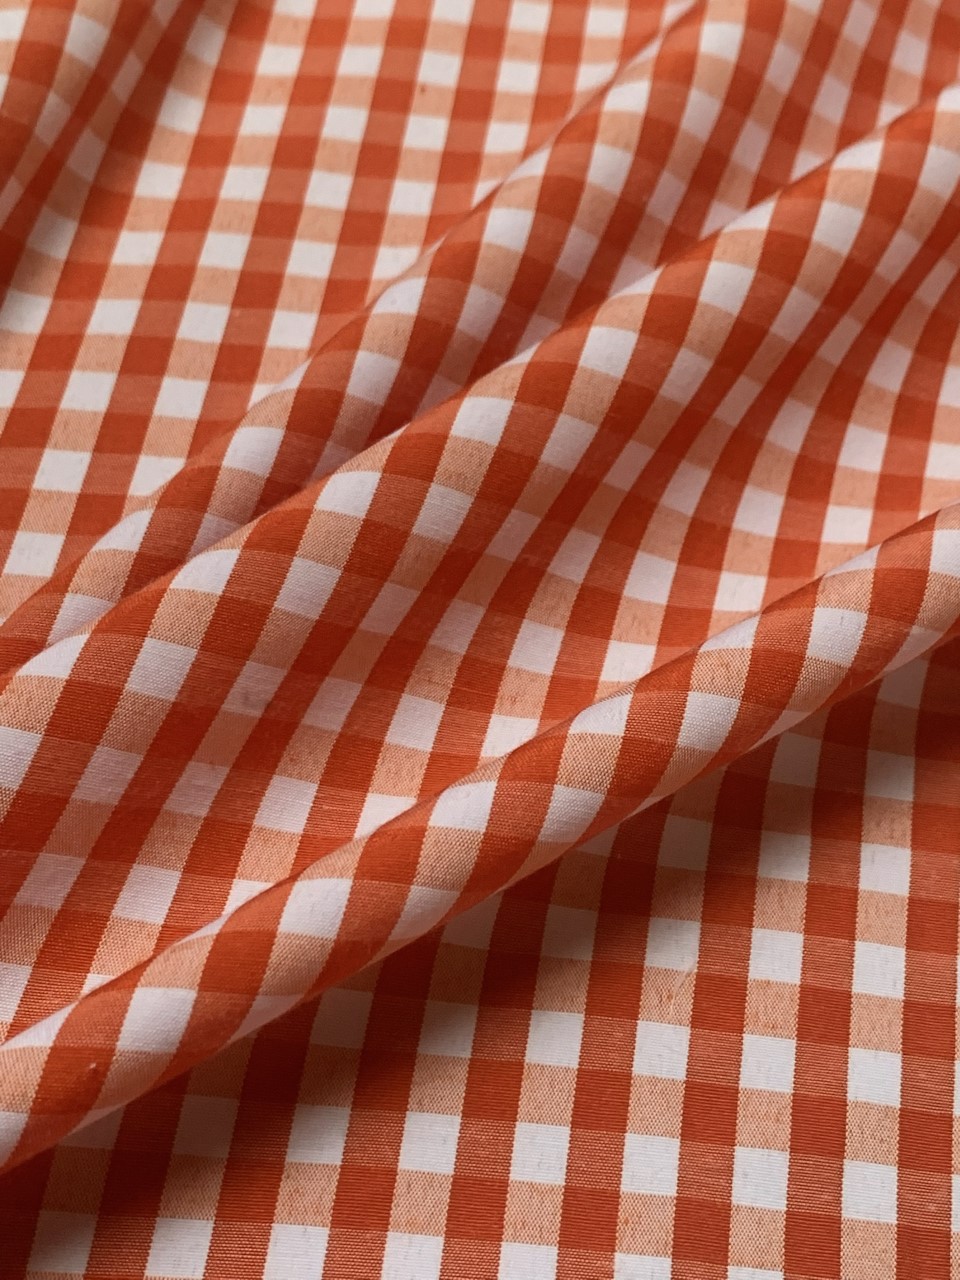 1/4" Orange Gingham Fabric 60"Wide By The Yard Poly Cotton Blend